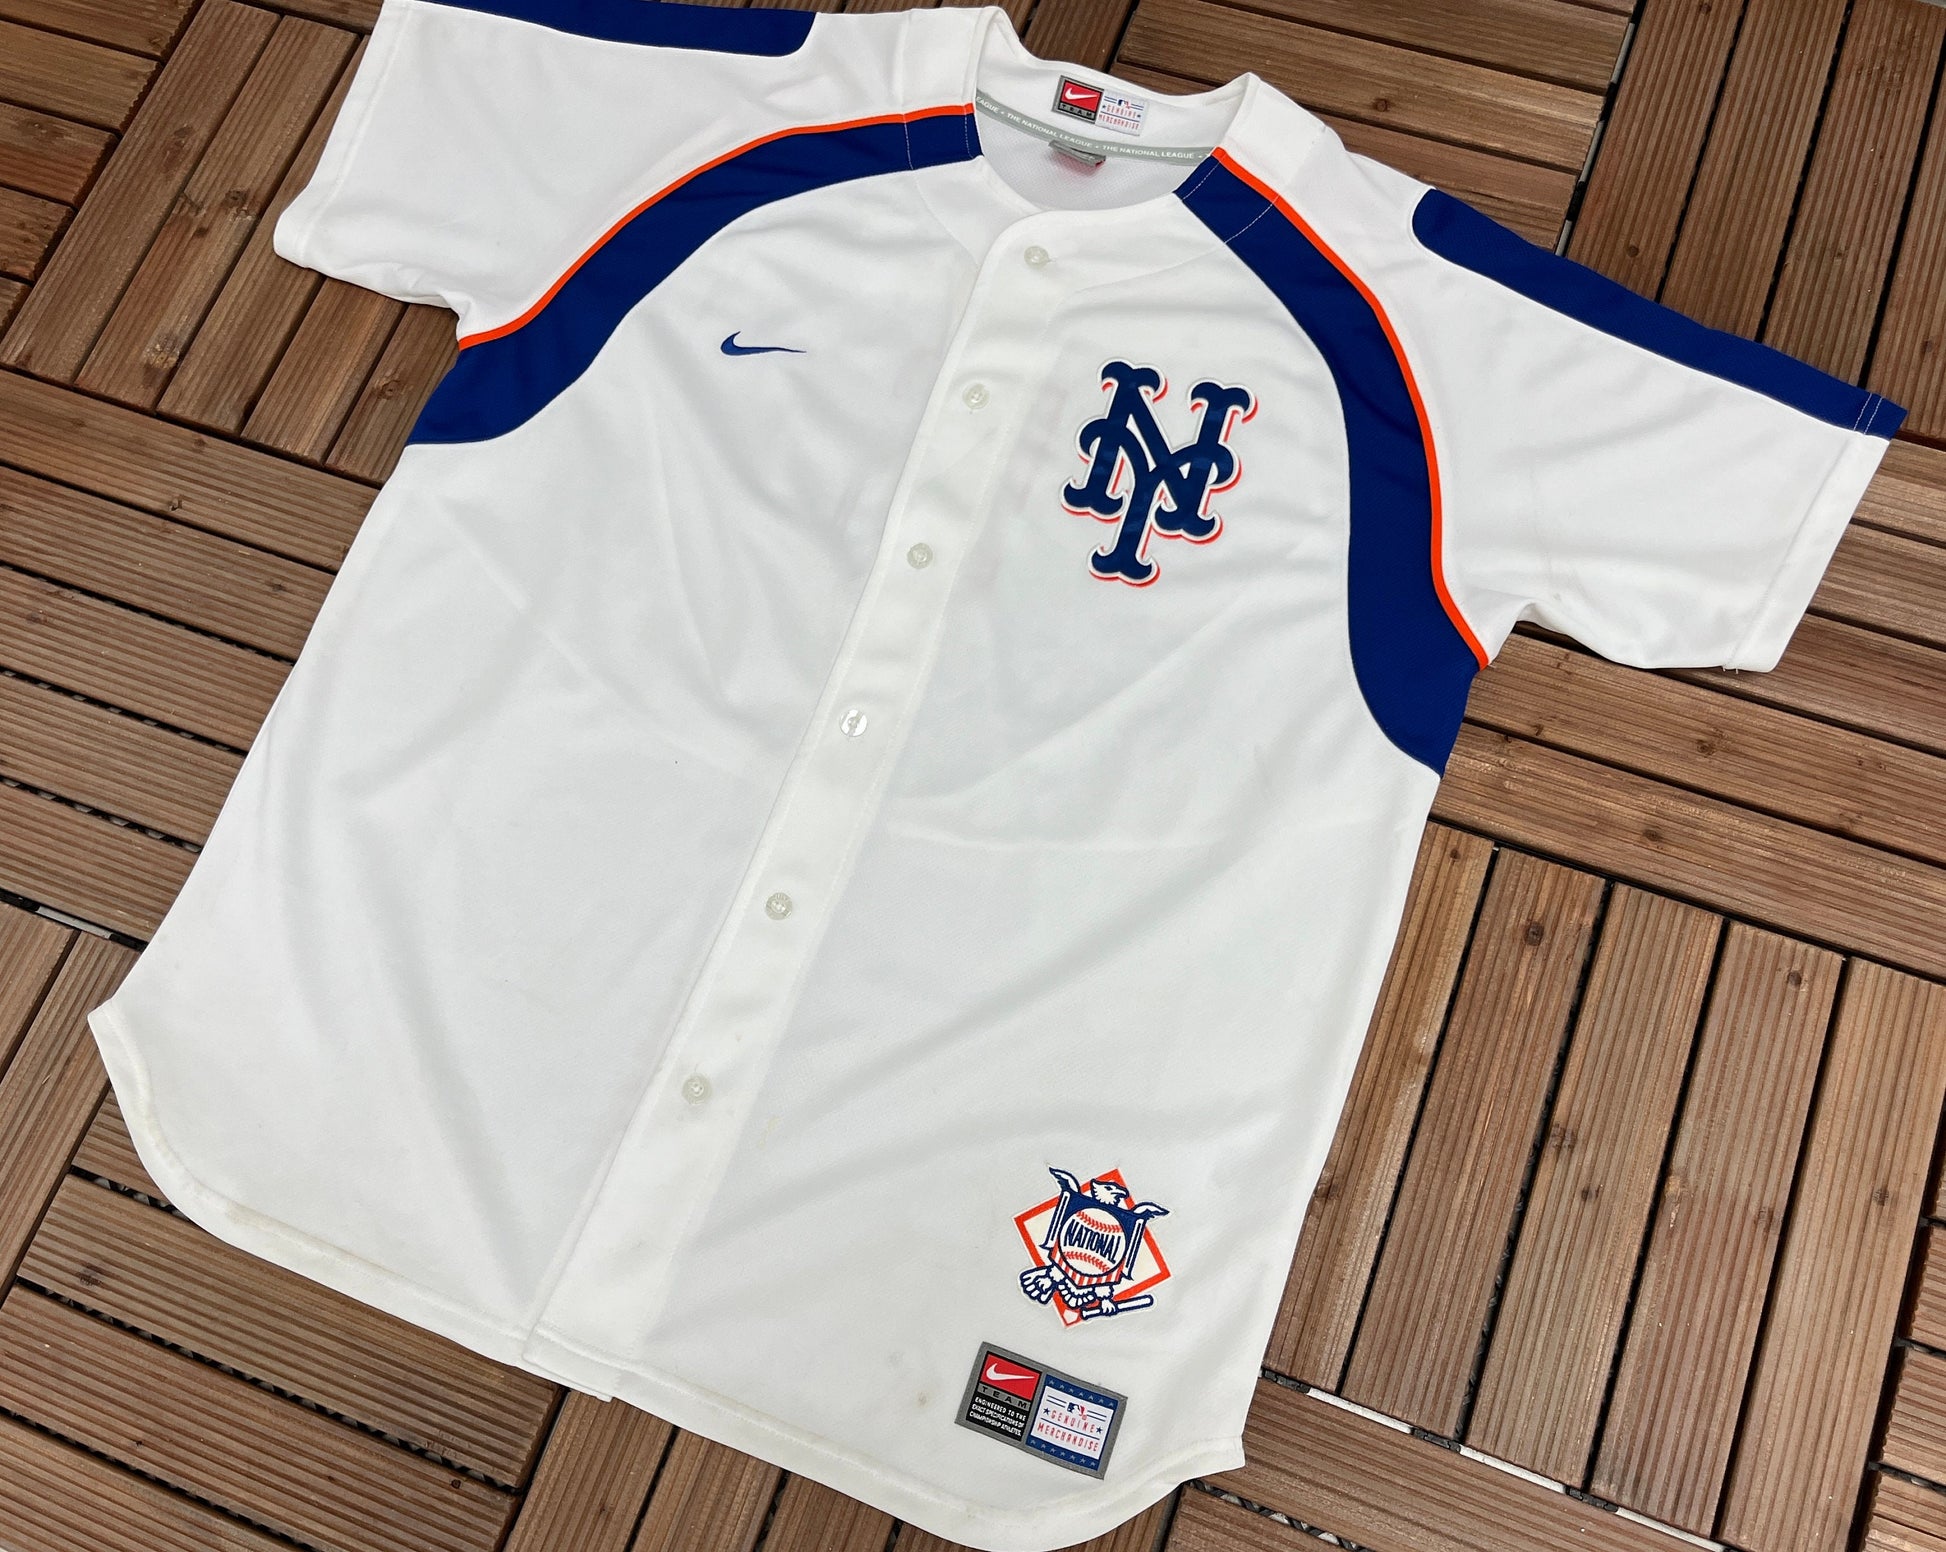 David Wright 5 New York Mets Nike Youth Large Jersey